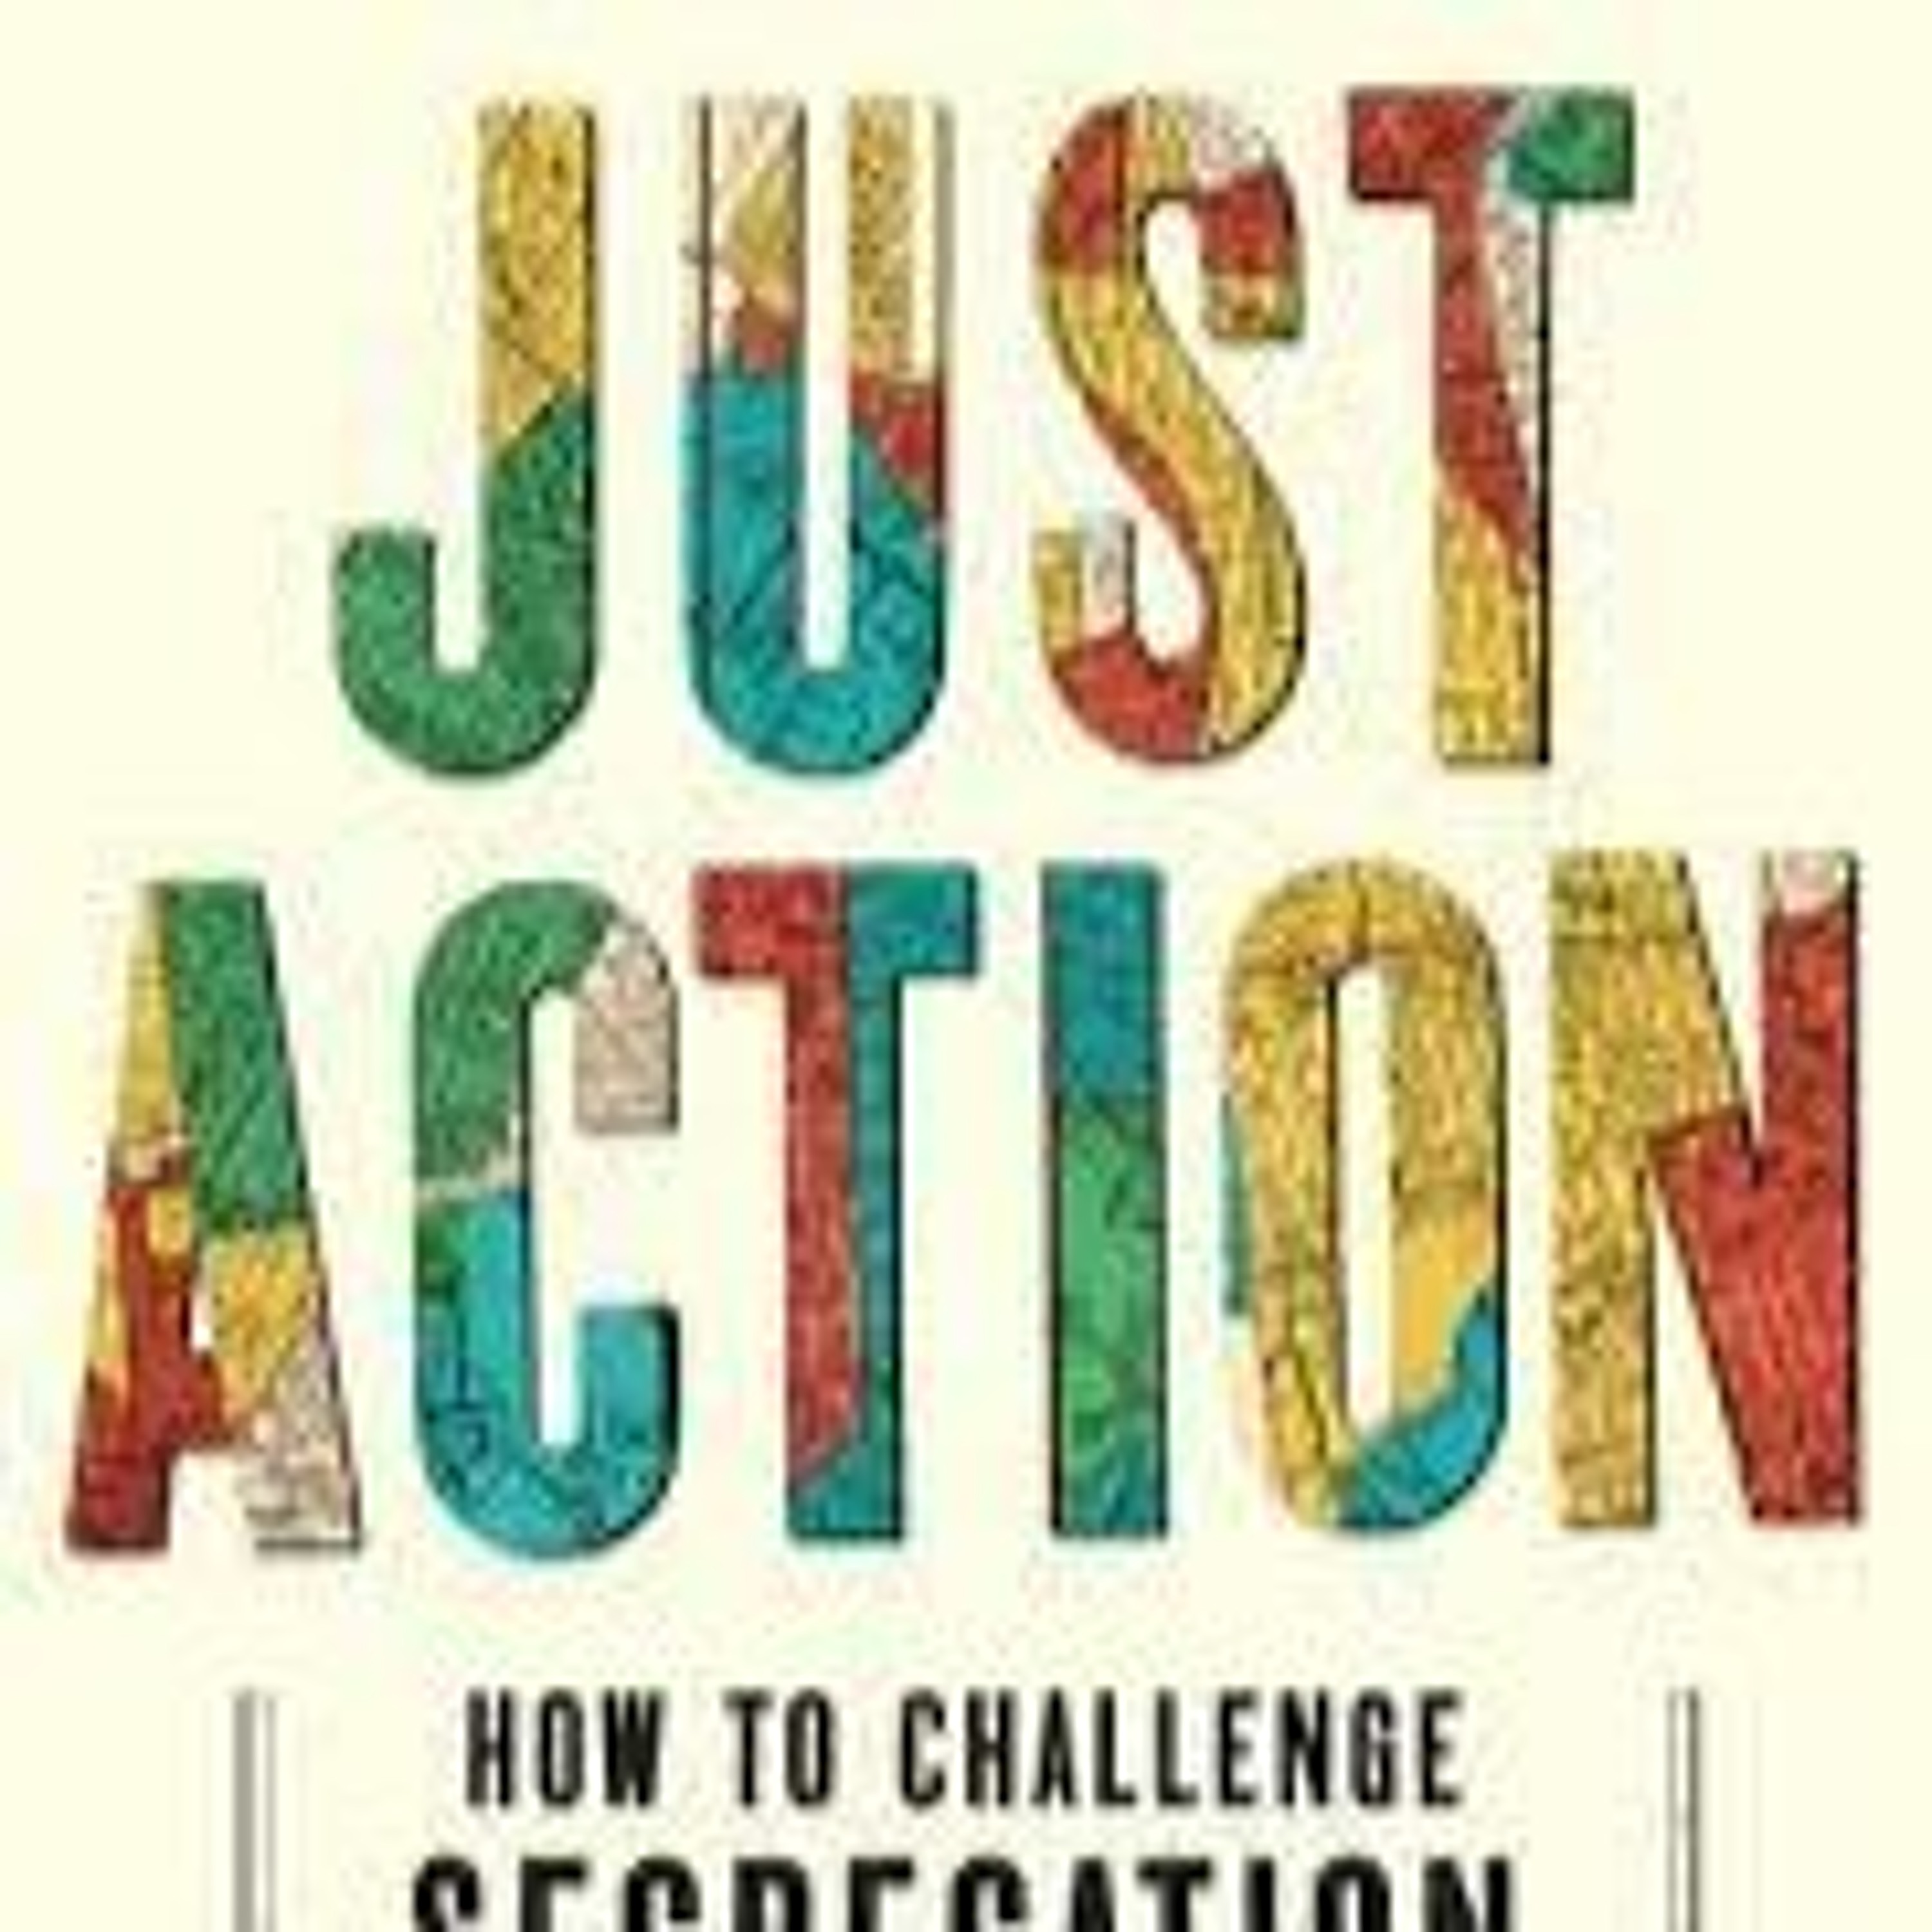 Just Action by Richard and Leah Rothstein